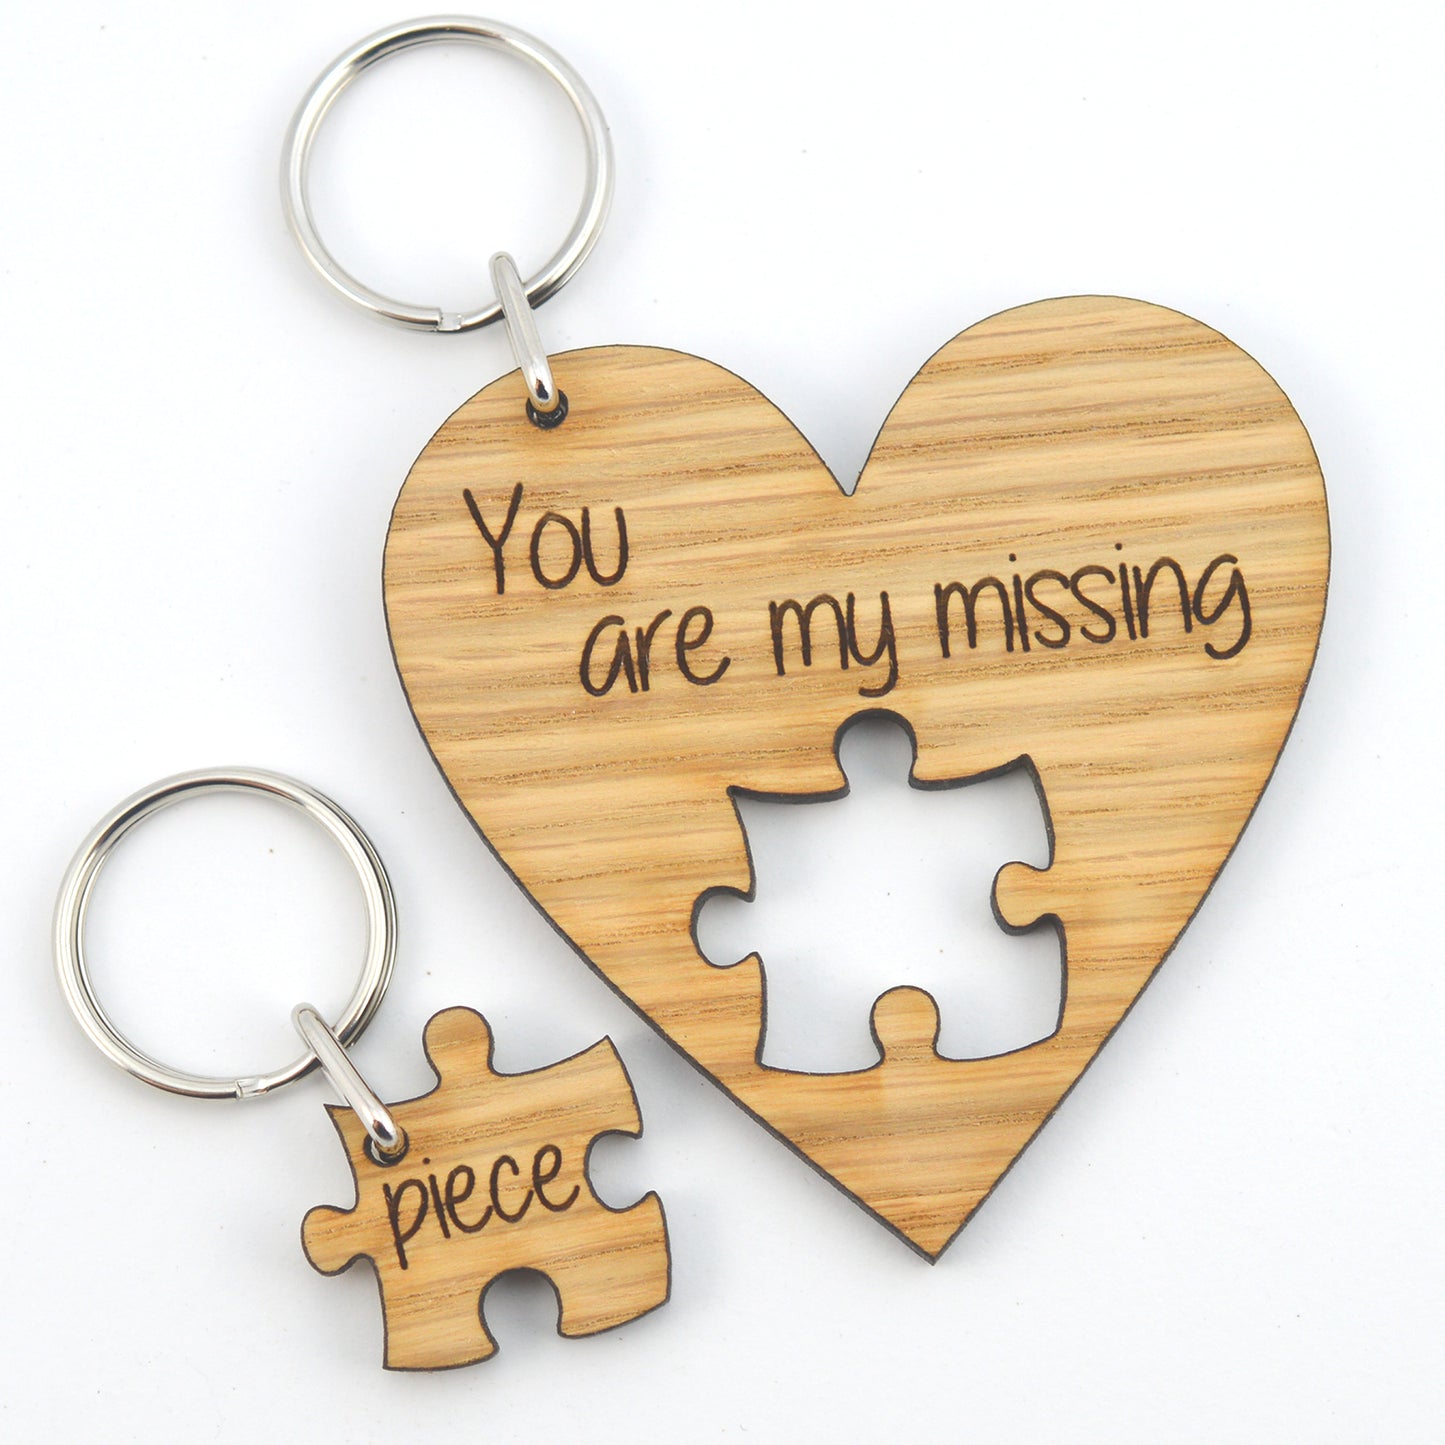 You Are My Missing Piece Keyring Set - Personalised Heart Shaped Jigsaw Puzzle Valentines Gift